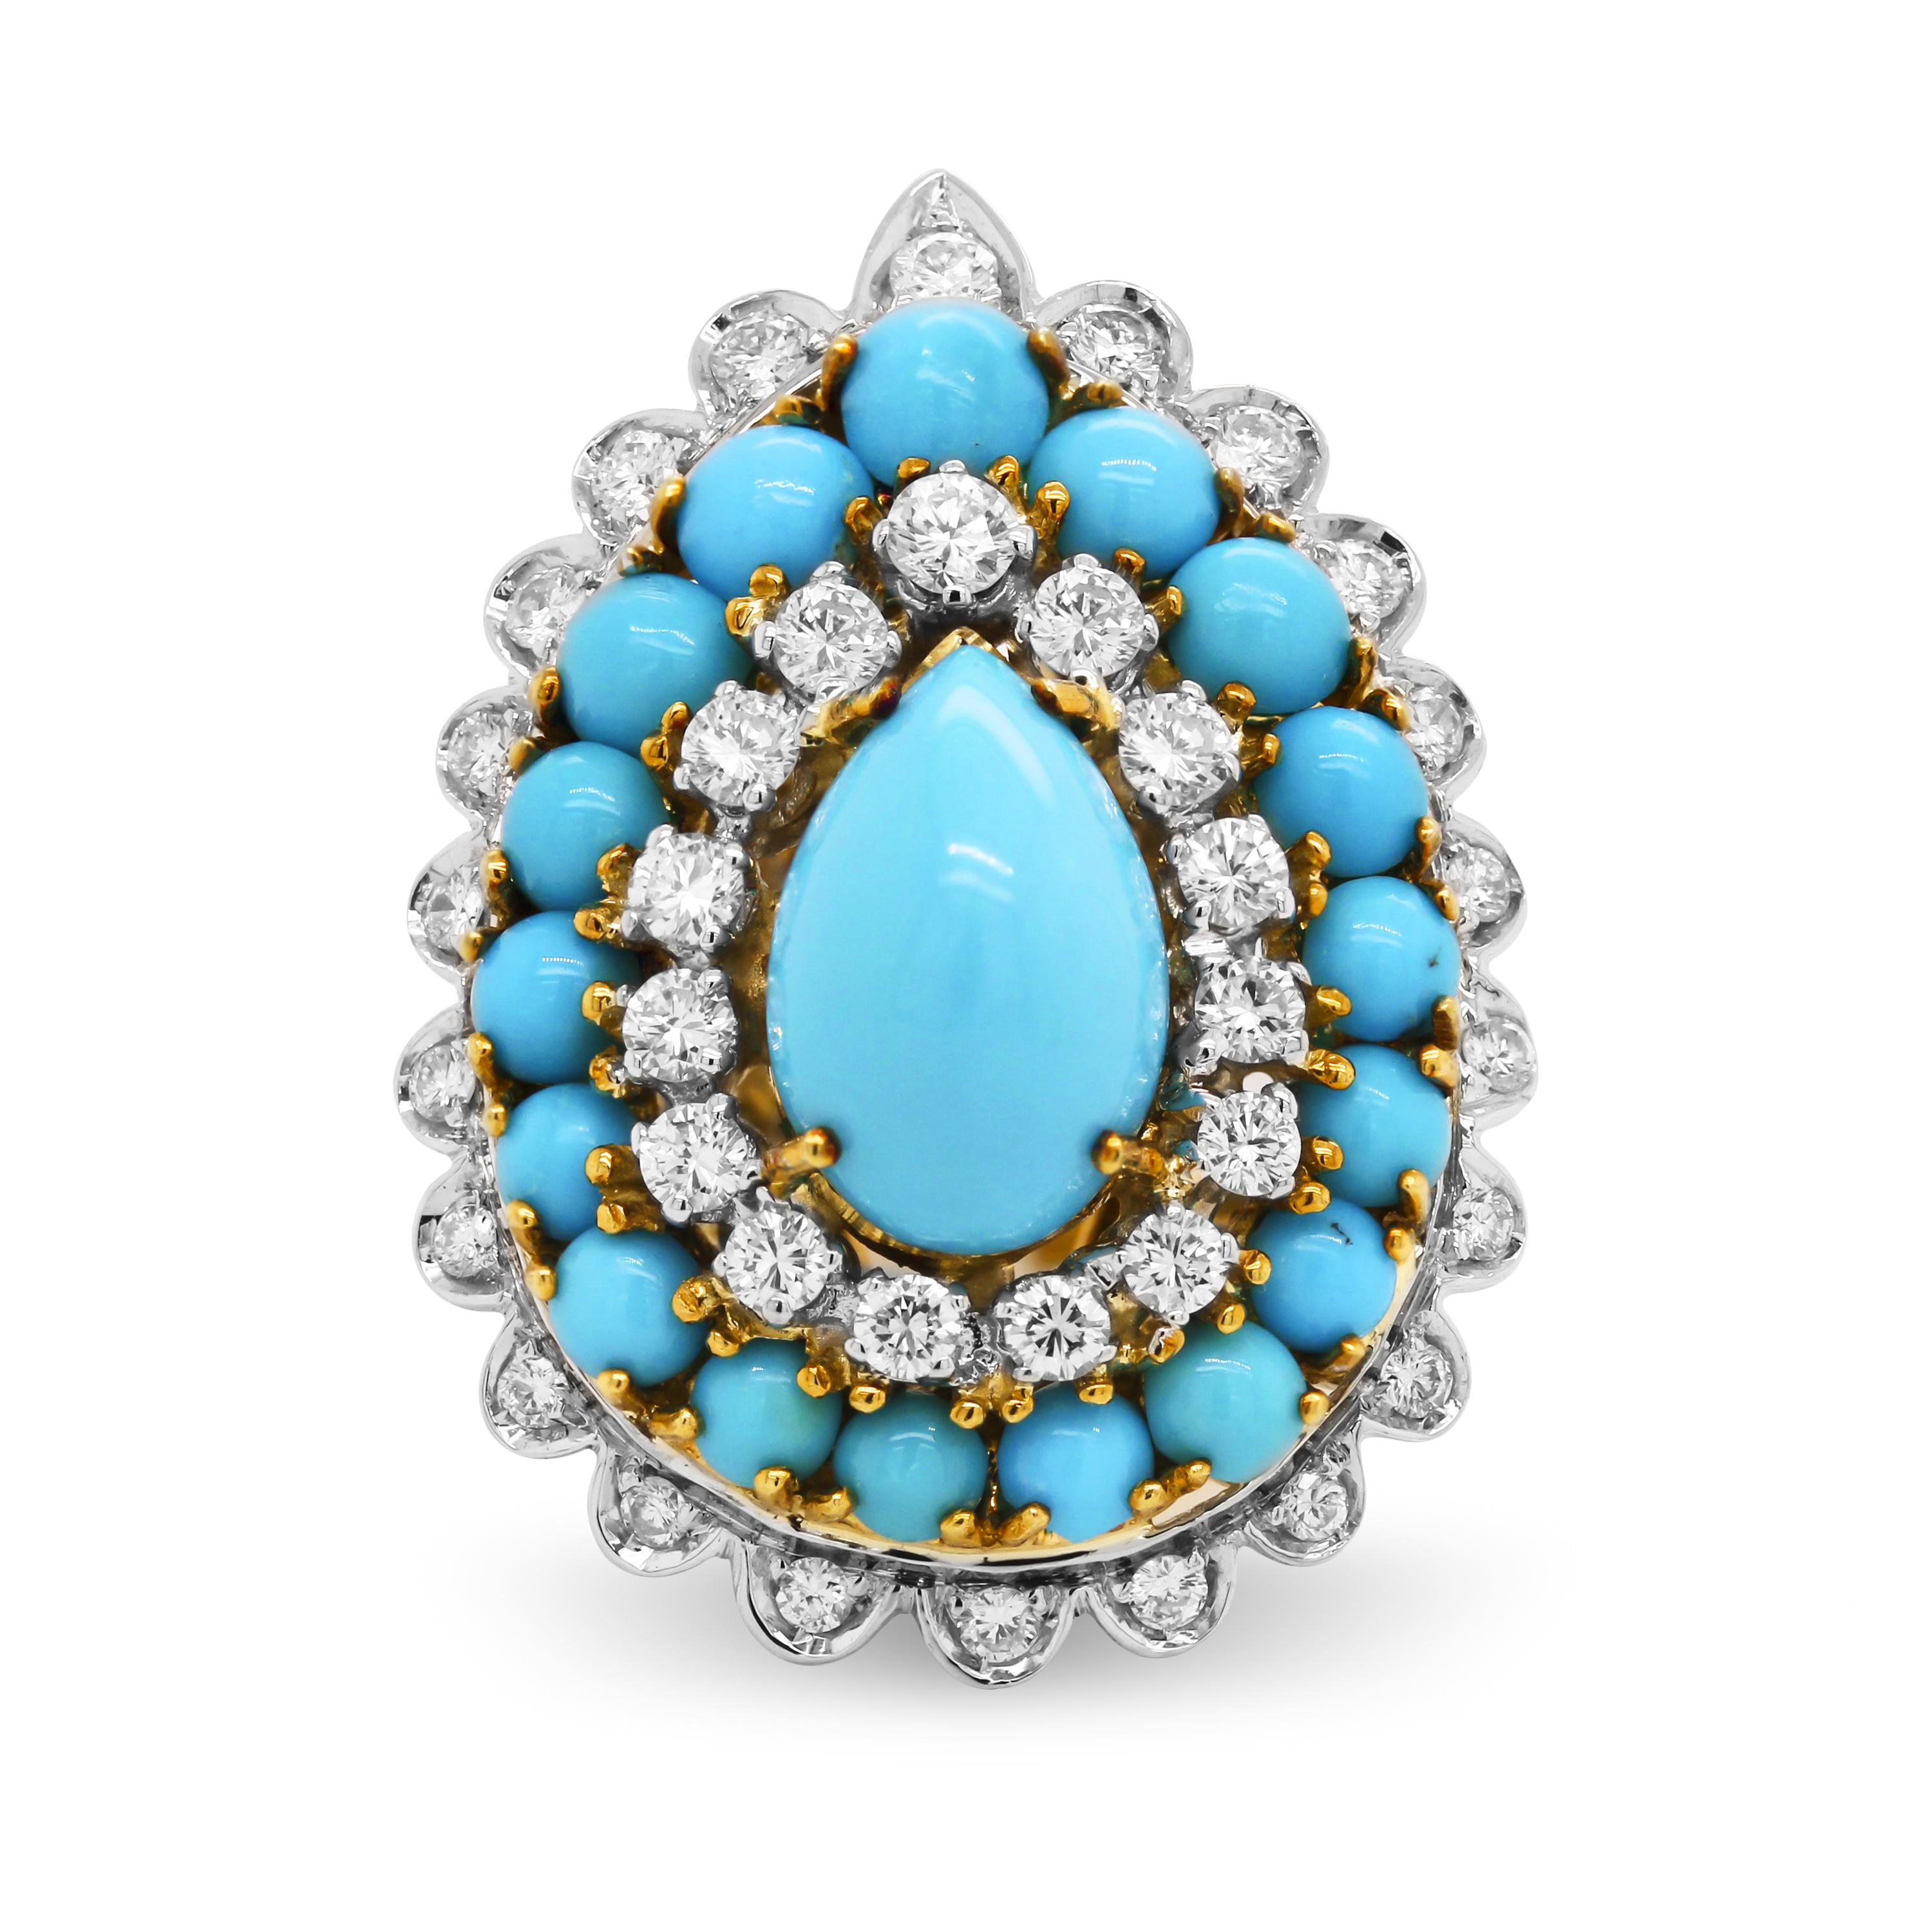 18K Yellow White Two Tone Gold Pear Shape Sleeping Beauty Turquoise Ring

These one-of-a-kind ring features some of the most high-quality turquoise we have ever seen. The center has one pear shape turquoise with a row of rounds along with